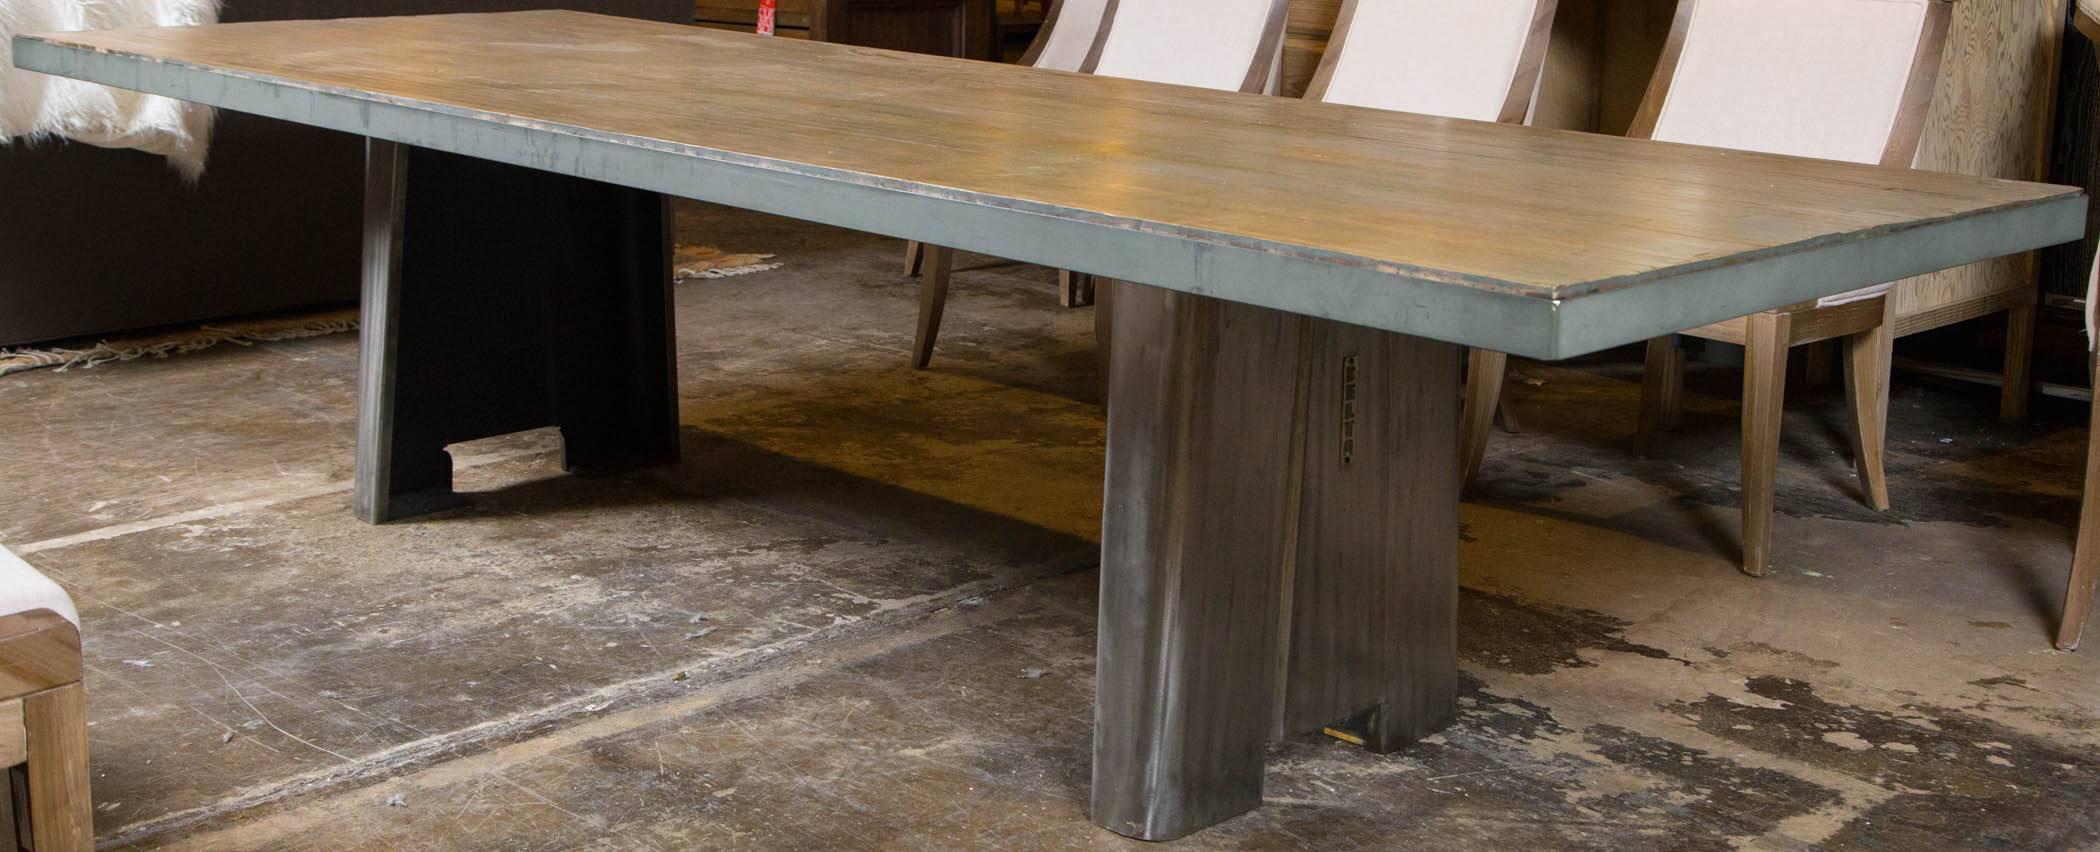 North American Bowing Alley Top Industrial Base Table